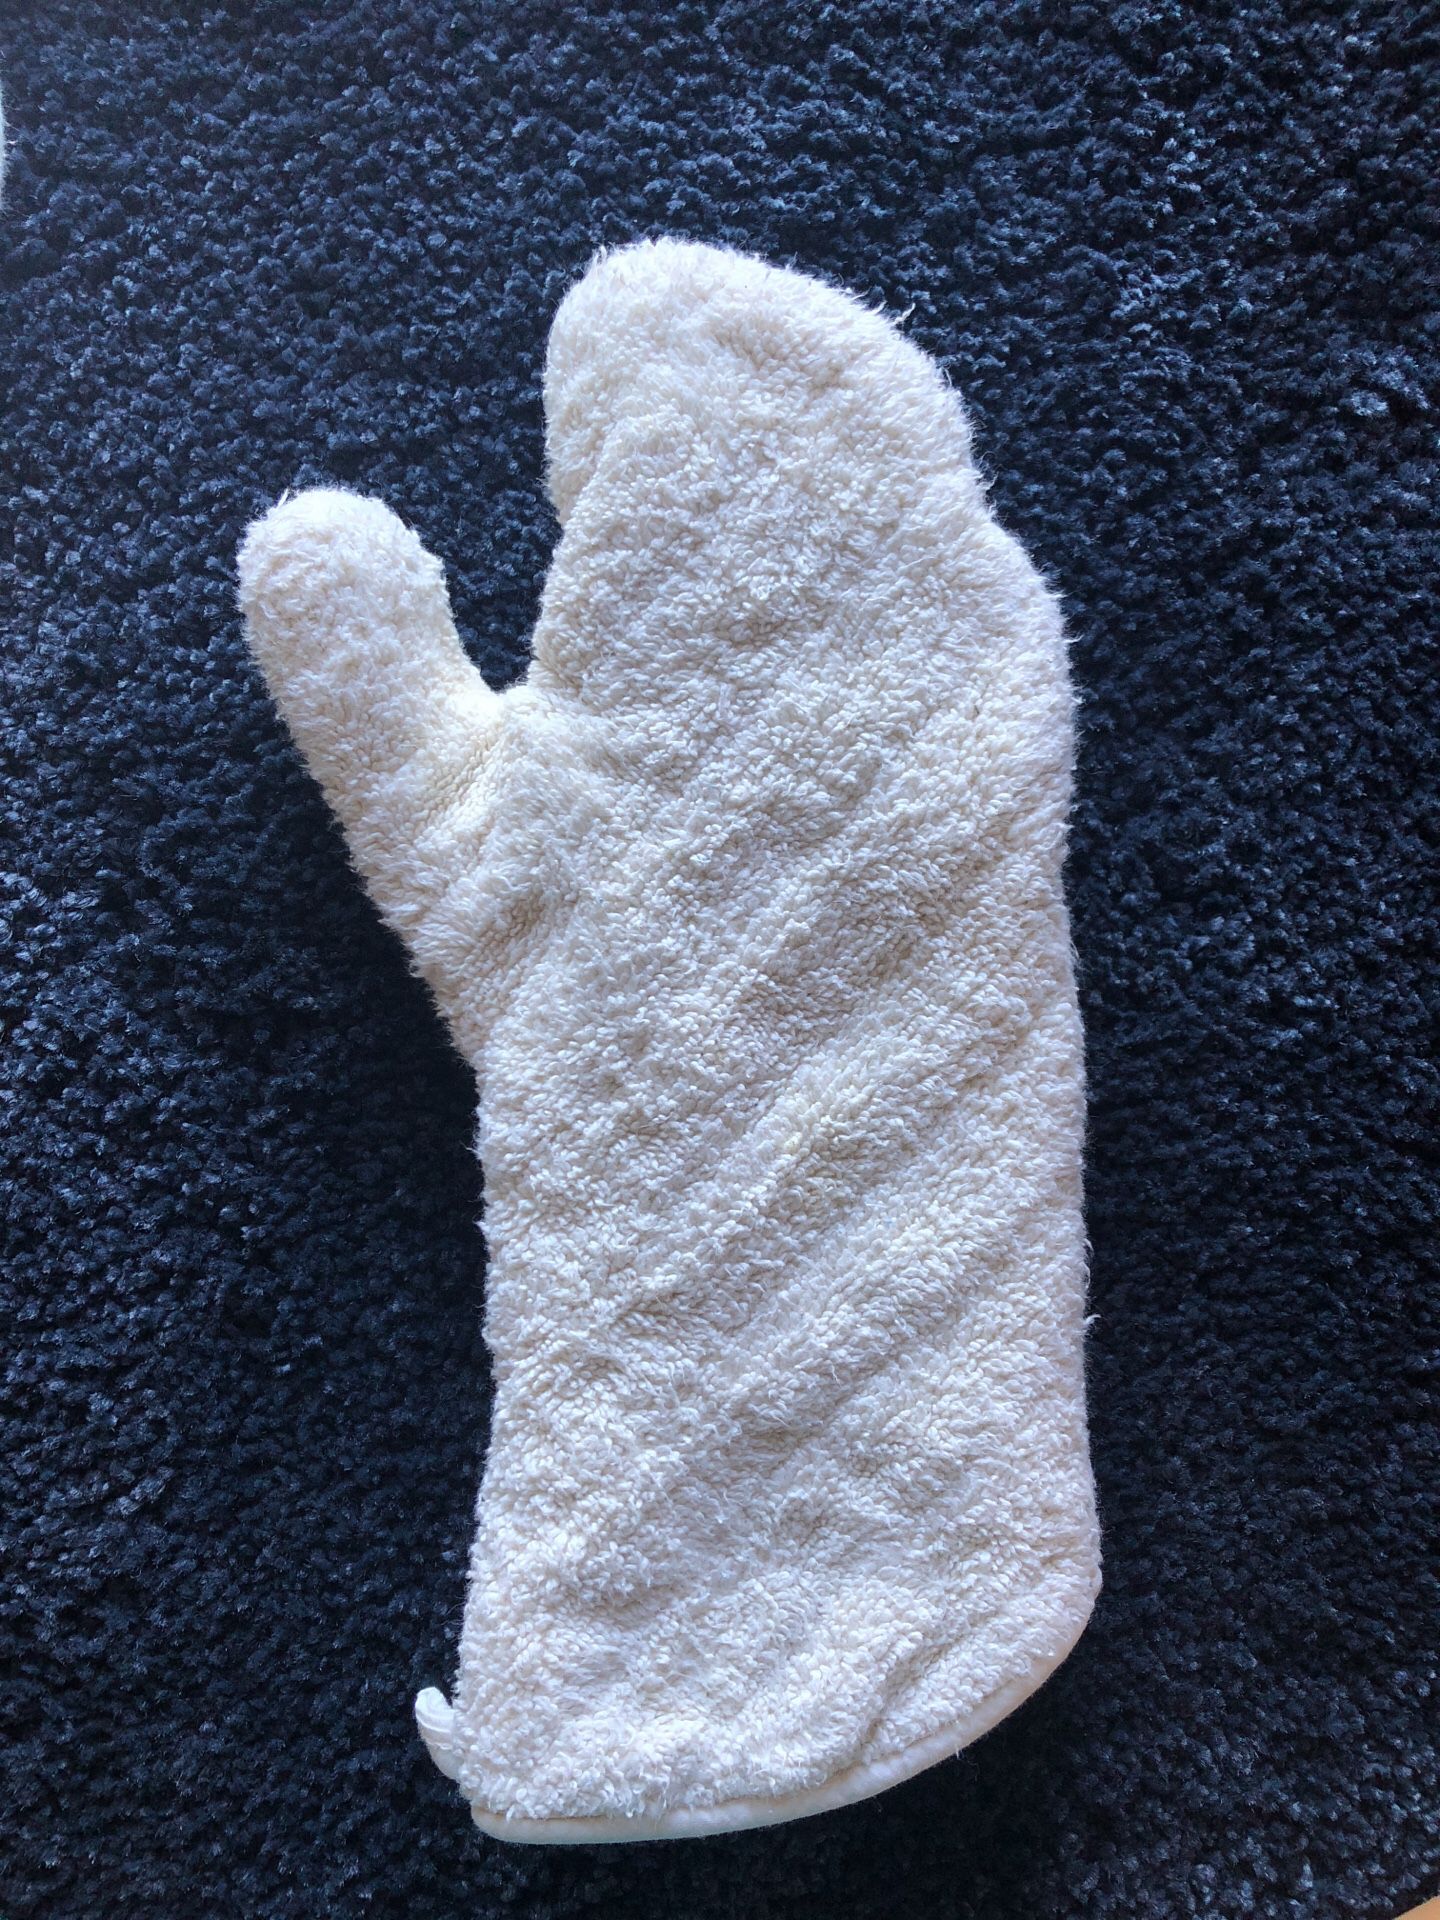 Best Set Of 2 Pampered Chef Oven Mitts for sale in Lancaster